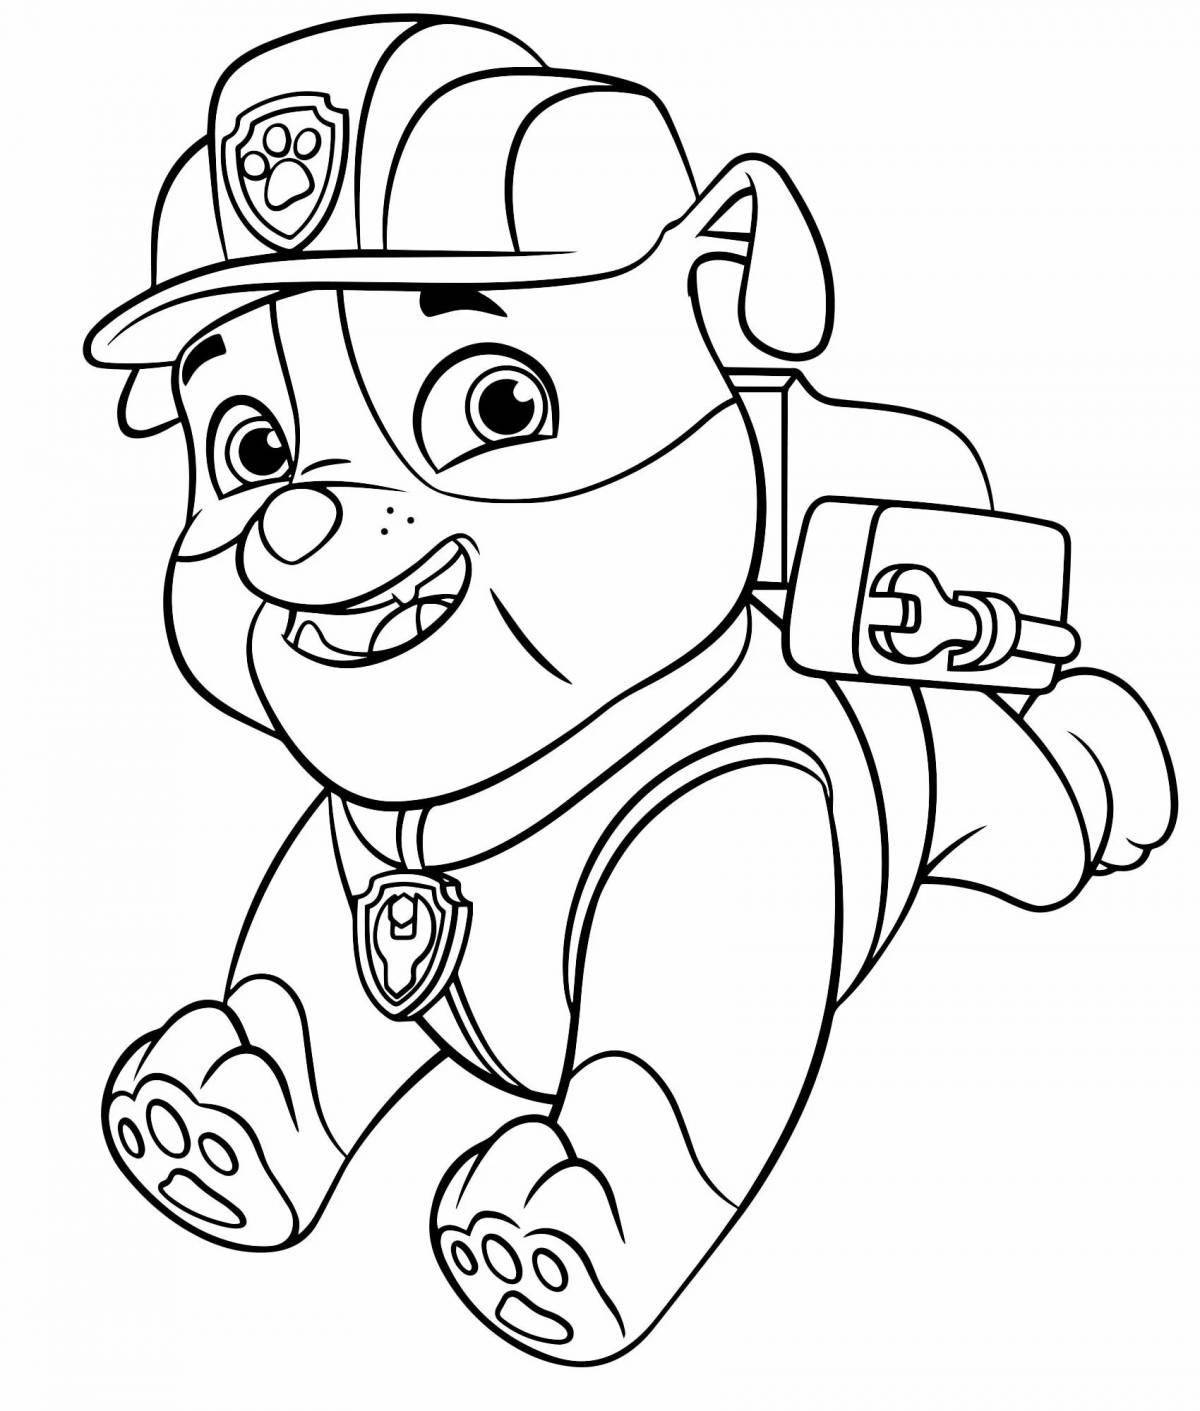 Bright cartoon children's coloring pages